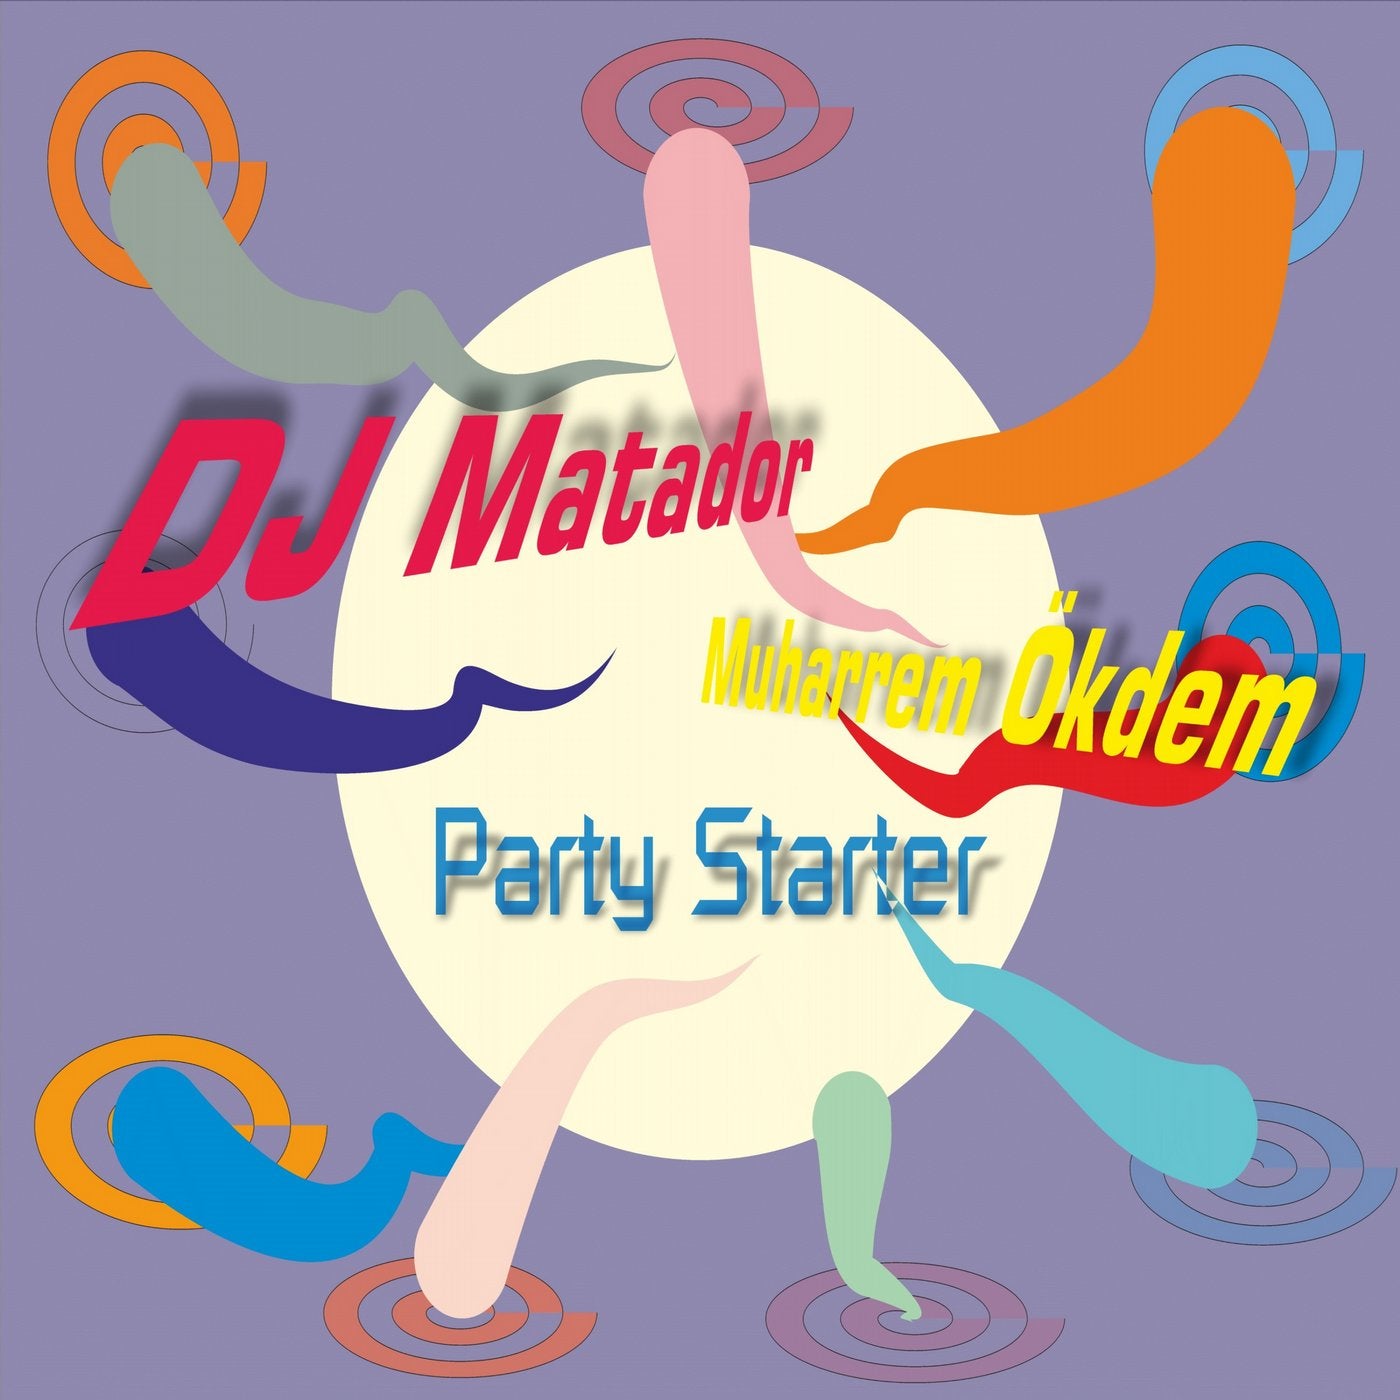 The Party Starter